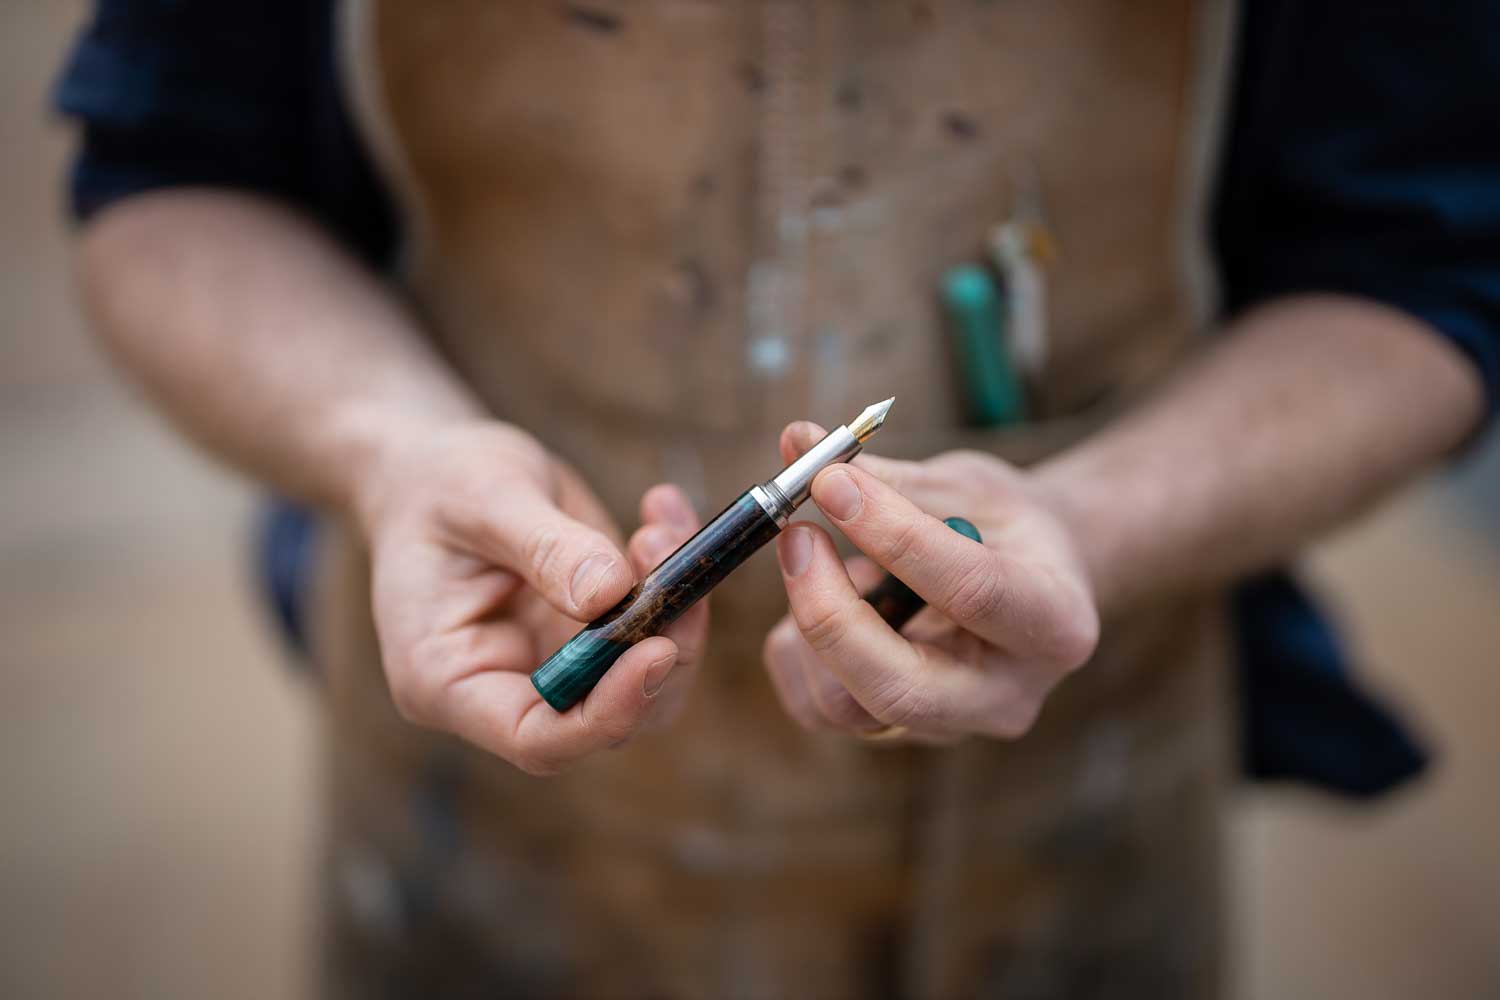 Tom holding a handmade wood and resin fountain pen